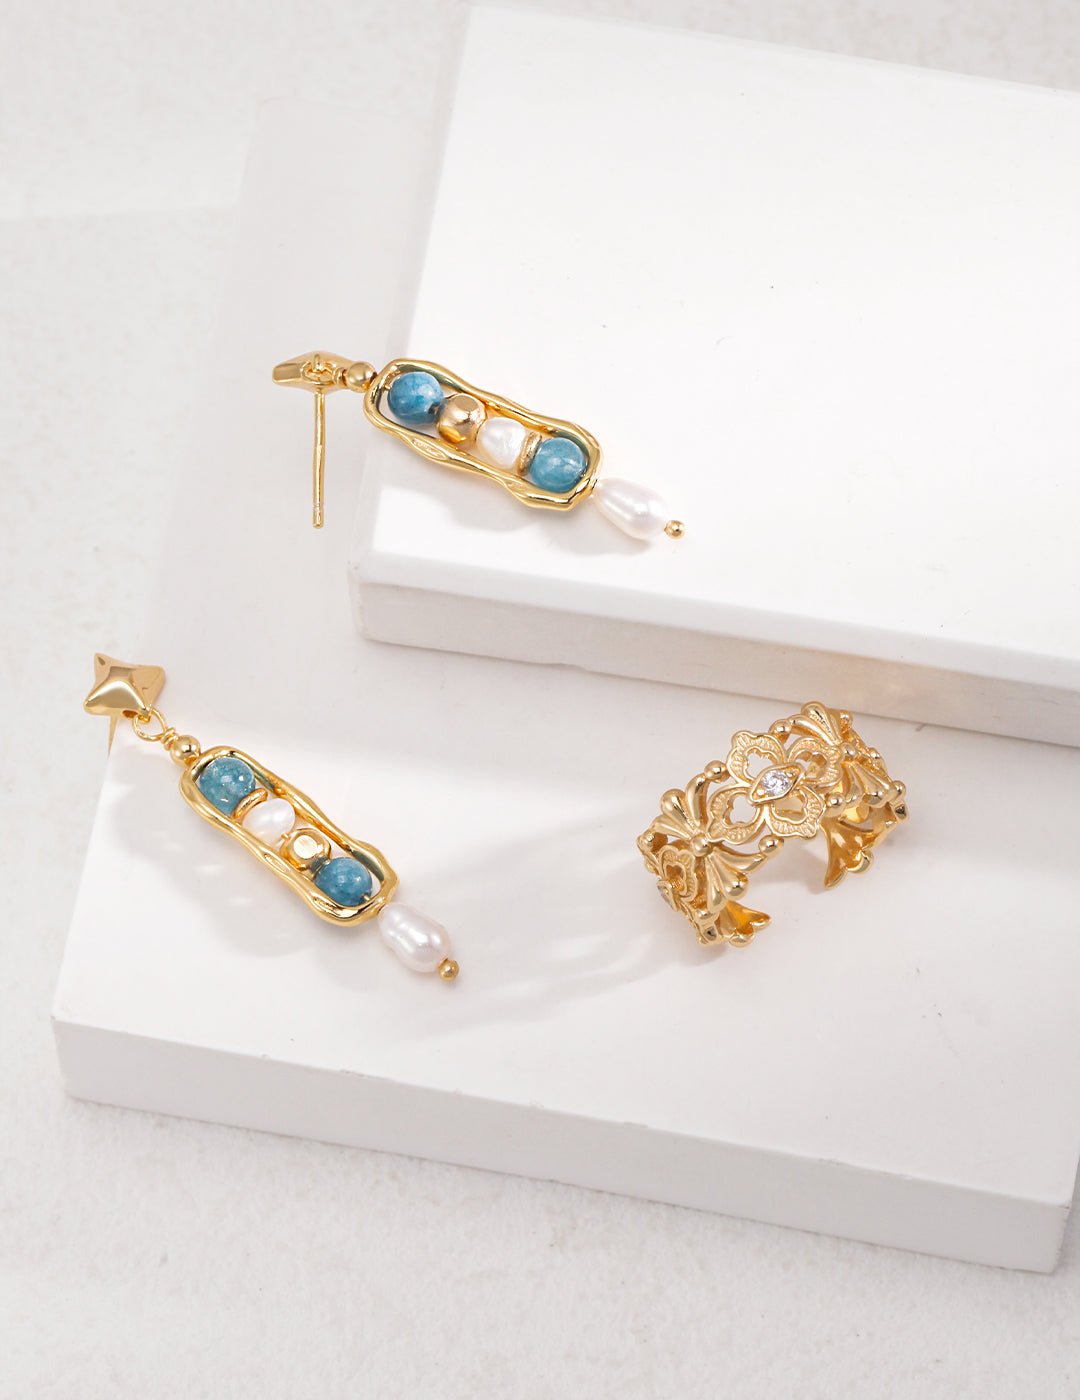 Mystical Fusion: Vintage Gold and Blue Earrings with White Pearls